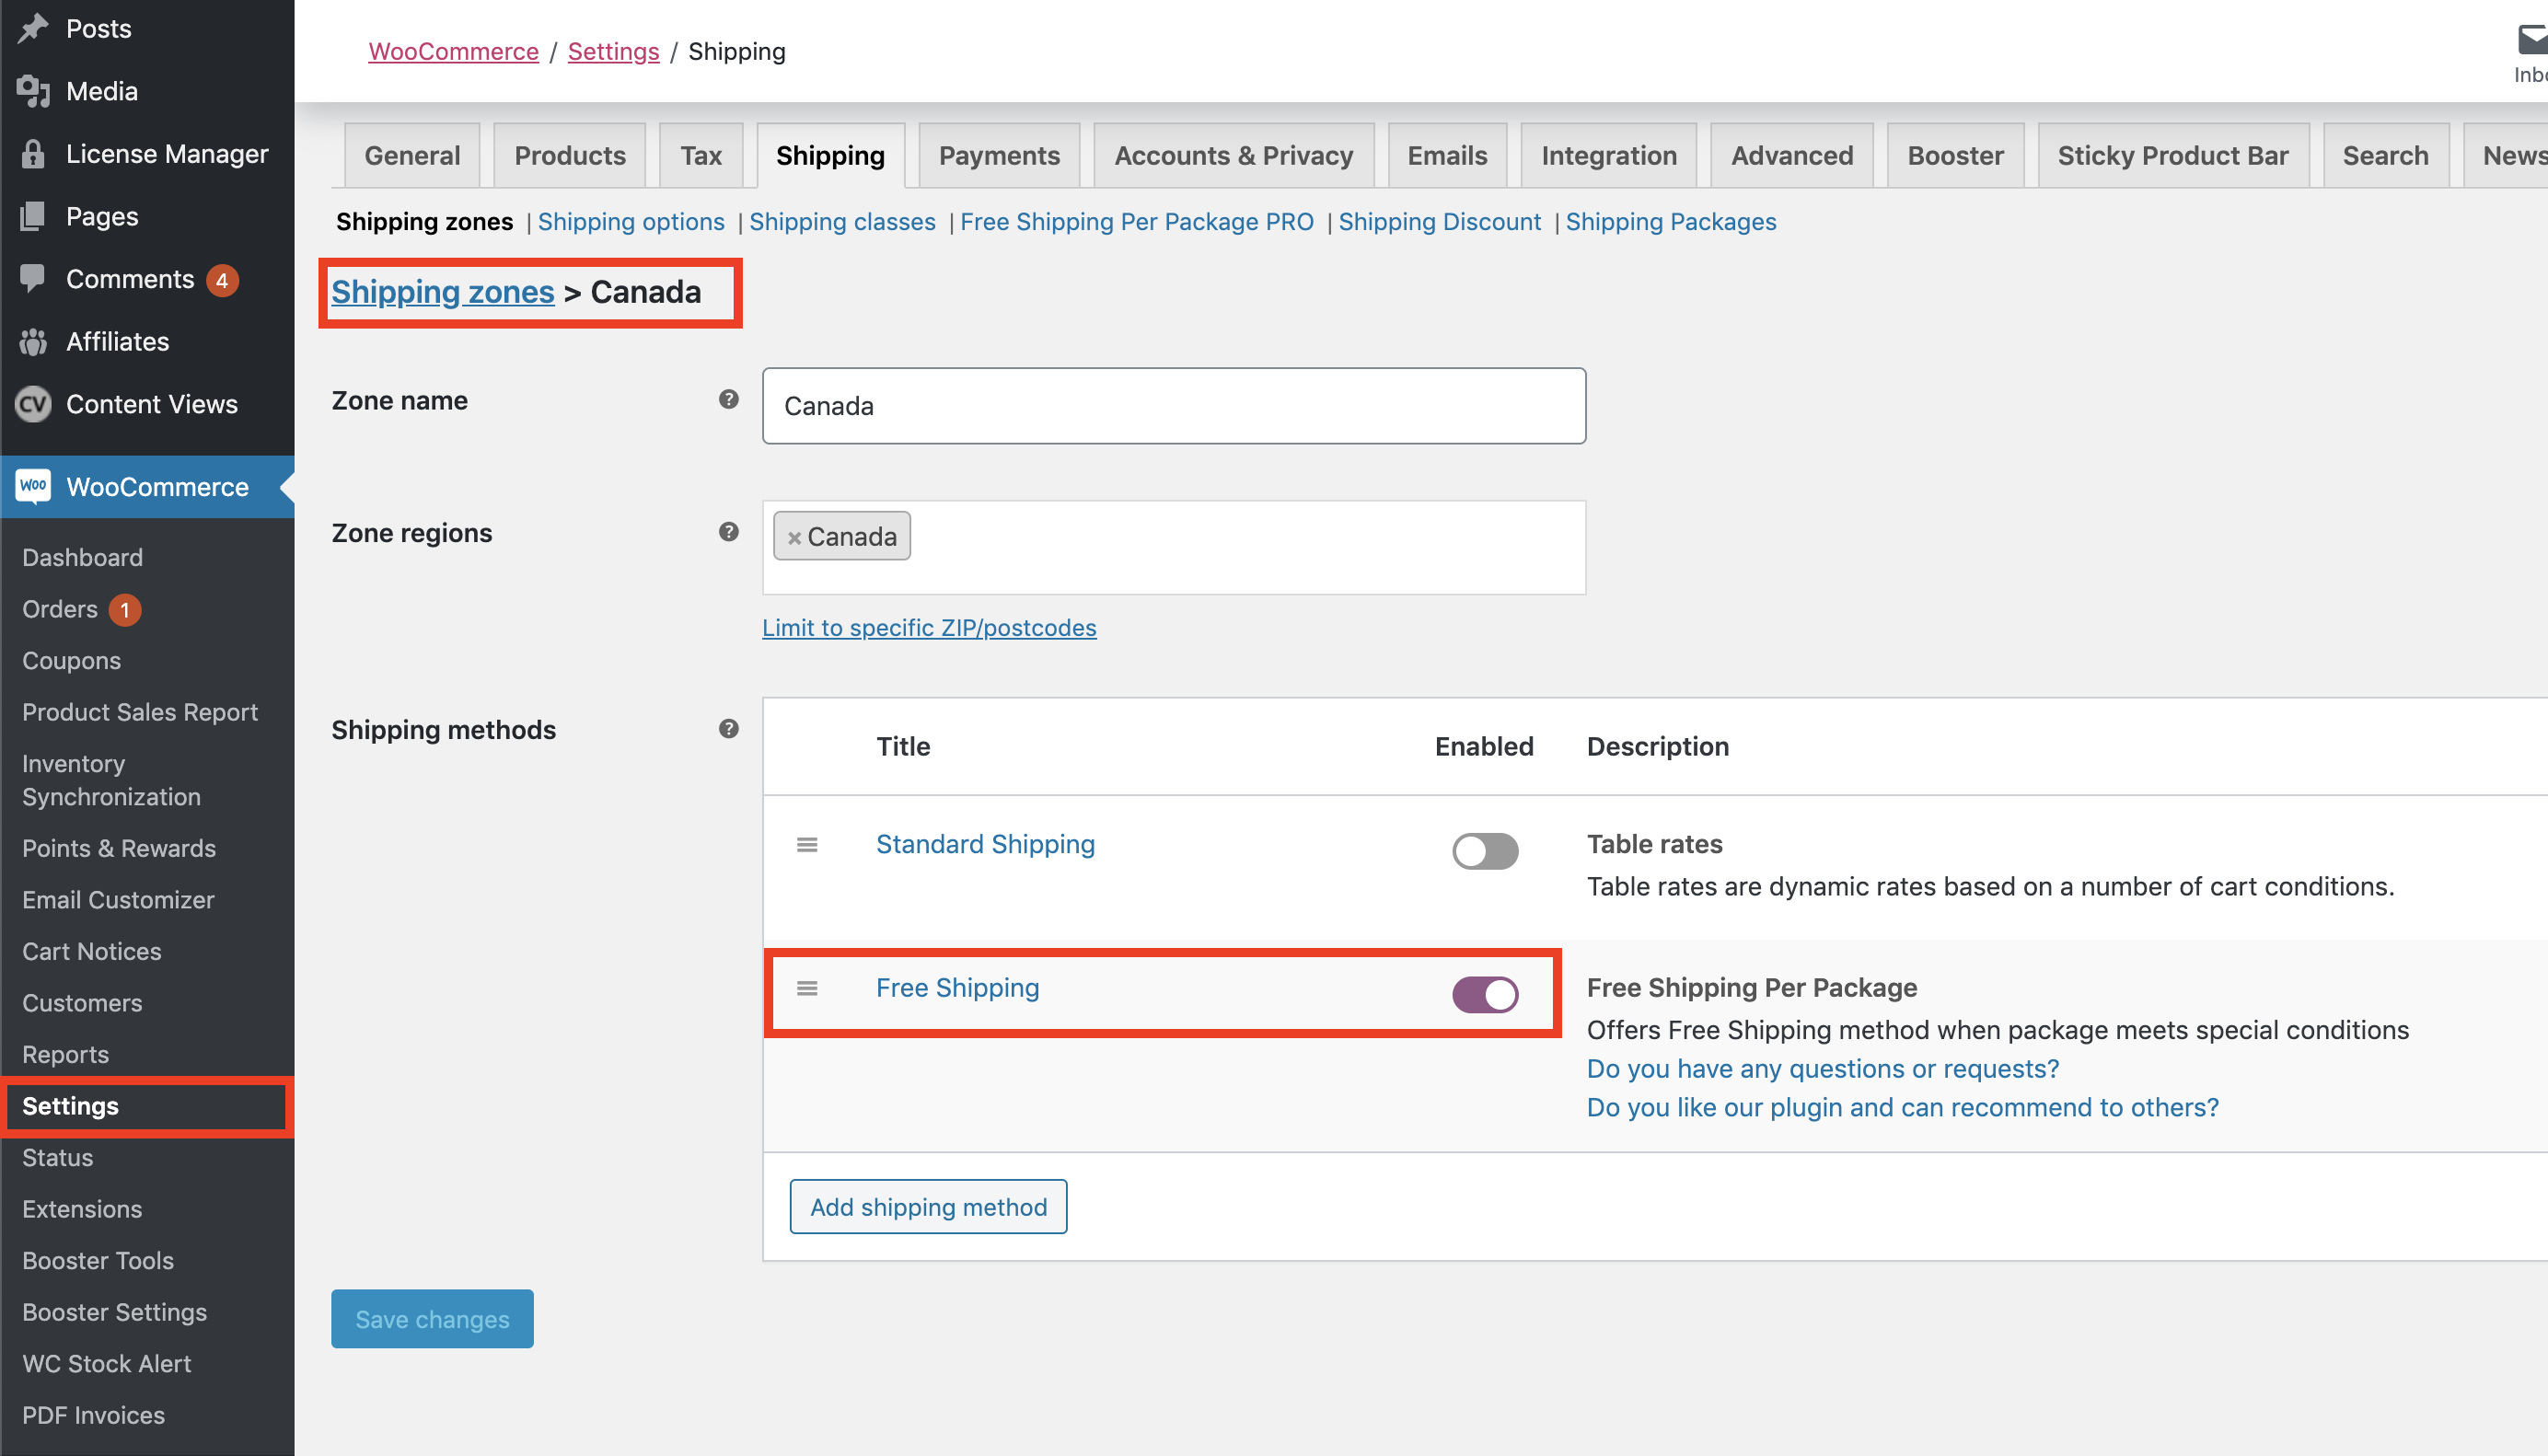 You can enable / disable individual Shipping Methods in the configuration of the Shipping Zone.